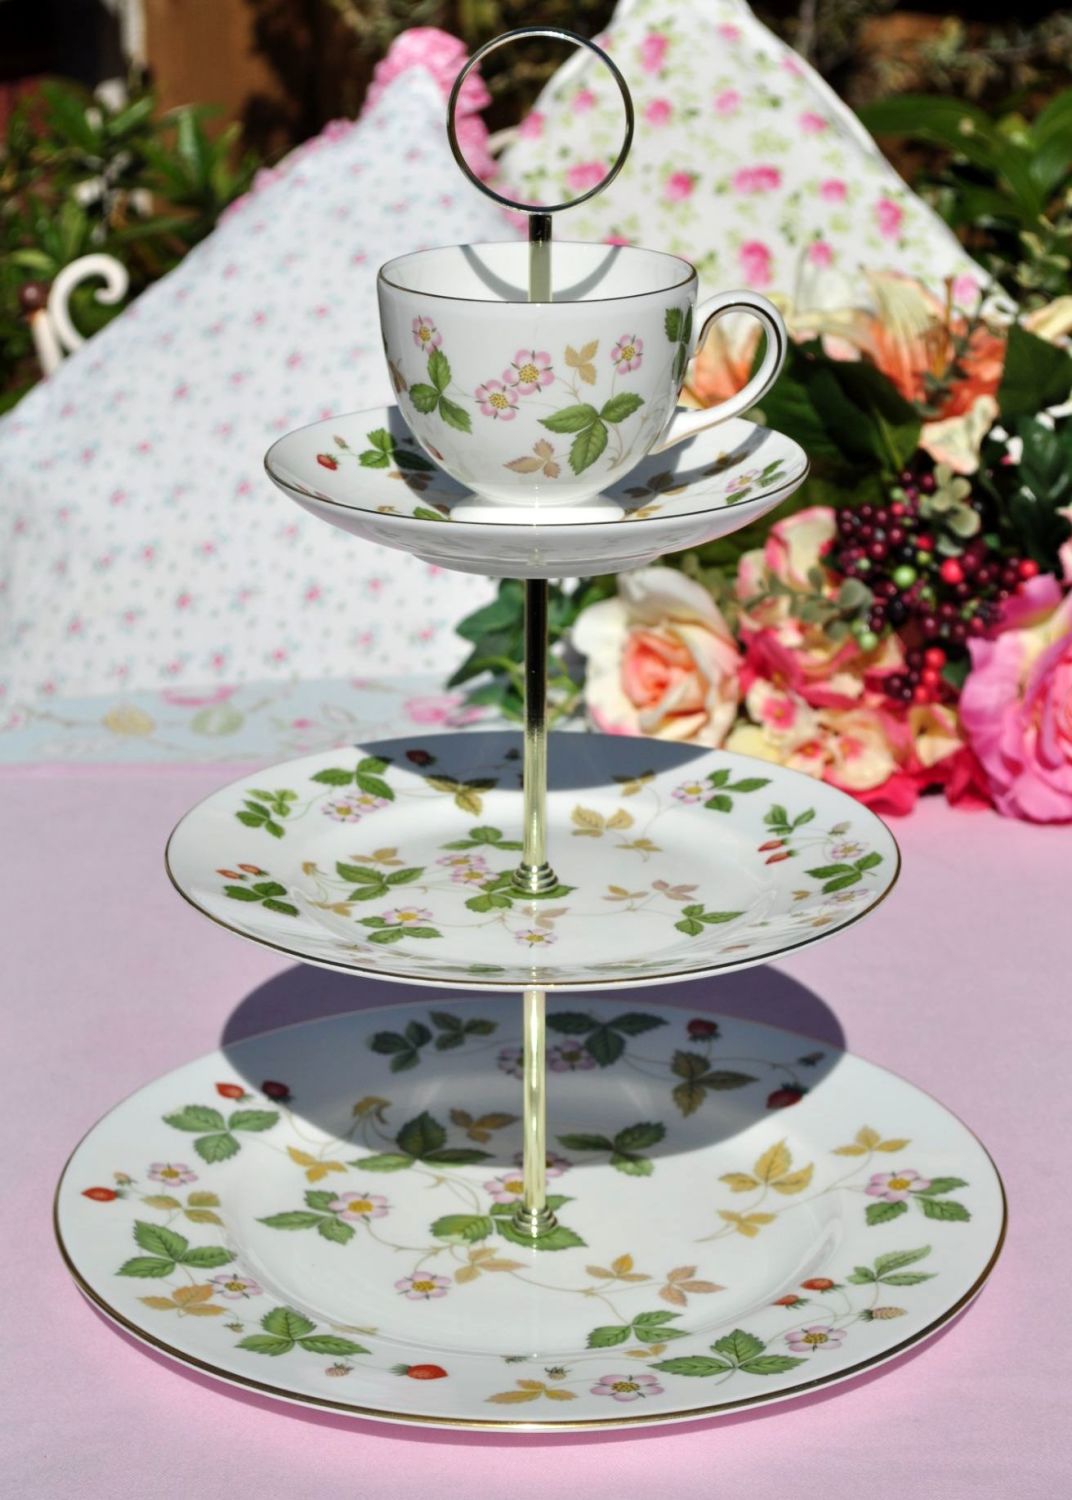 Wedgwood Wild Strawberry Teacup Top 3 Tier Cake Stand